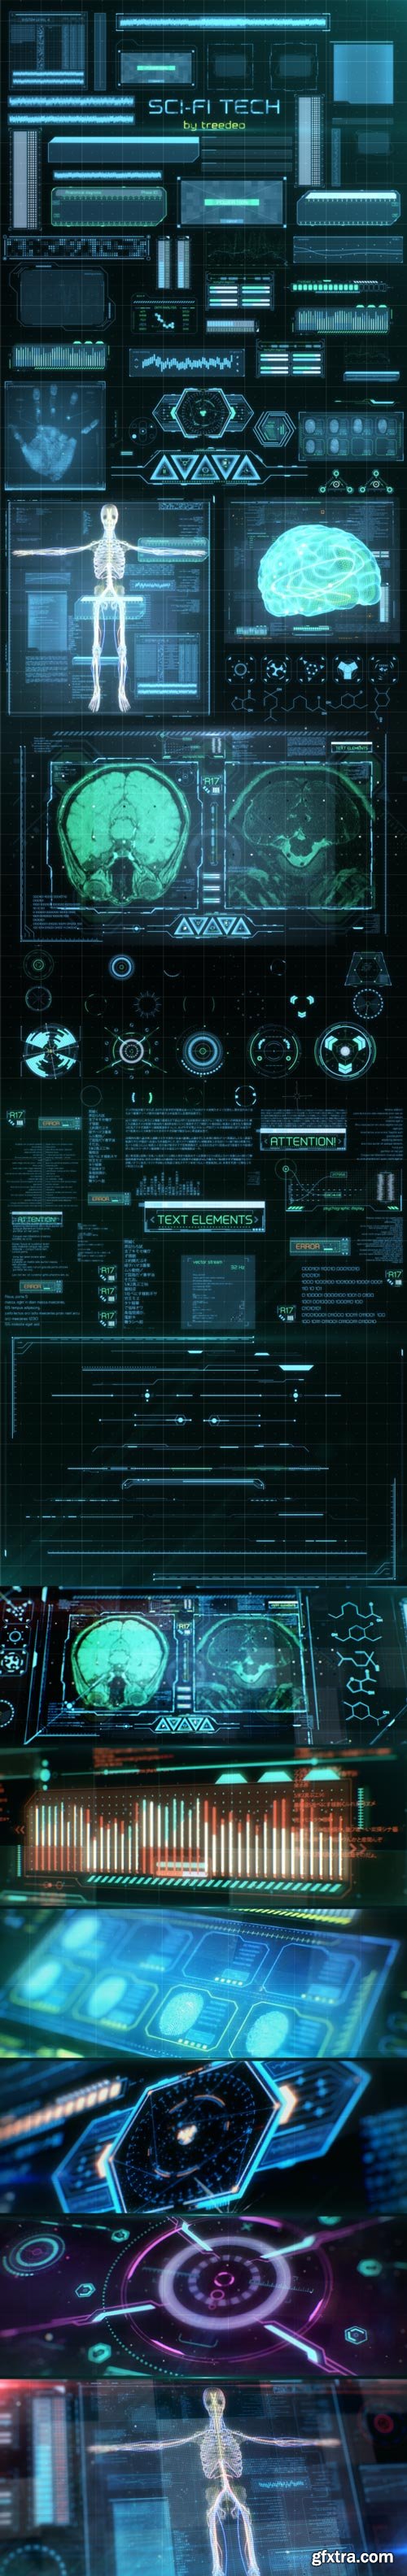 Videohive - HUD Sci-Fi Infographic - 18967517